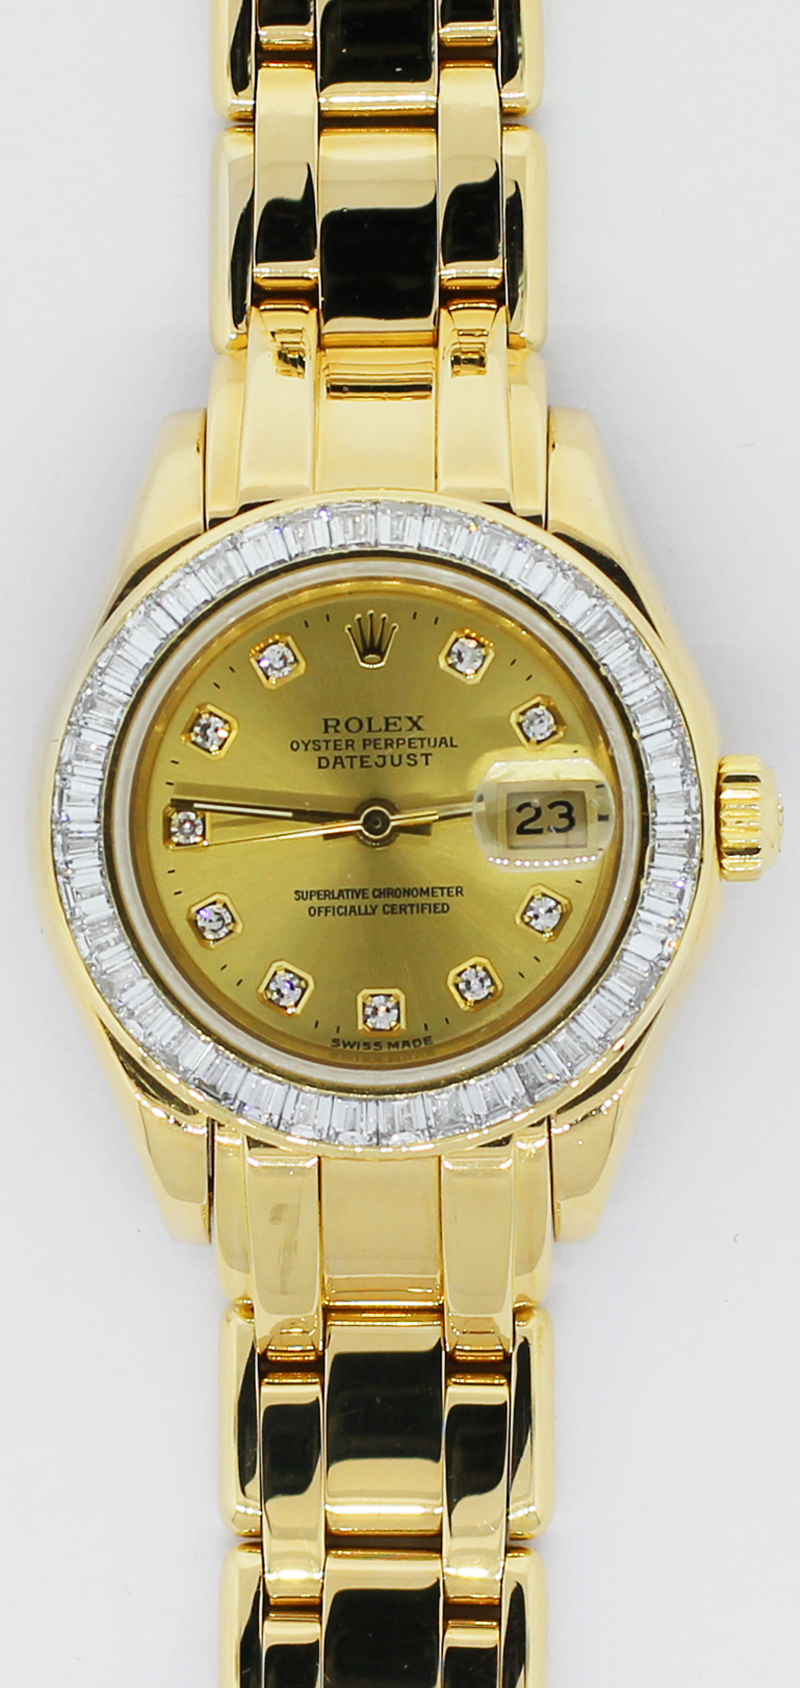 Rolex 18k Yellow Gold Masterpiece Full Factory Emerald Cut Diamond Bezel Factory Champagne Diamond Dial Model 69308 Complete with Box & Papers